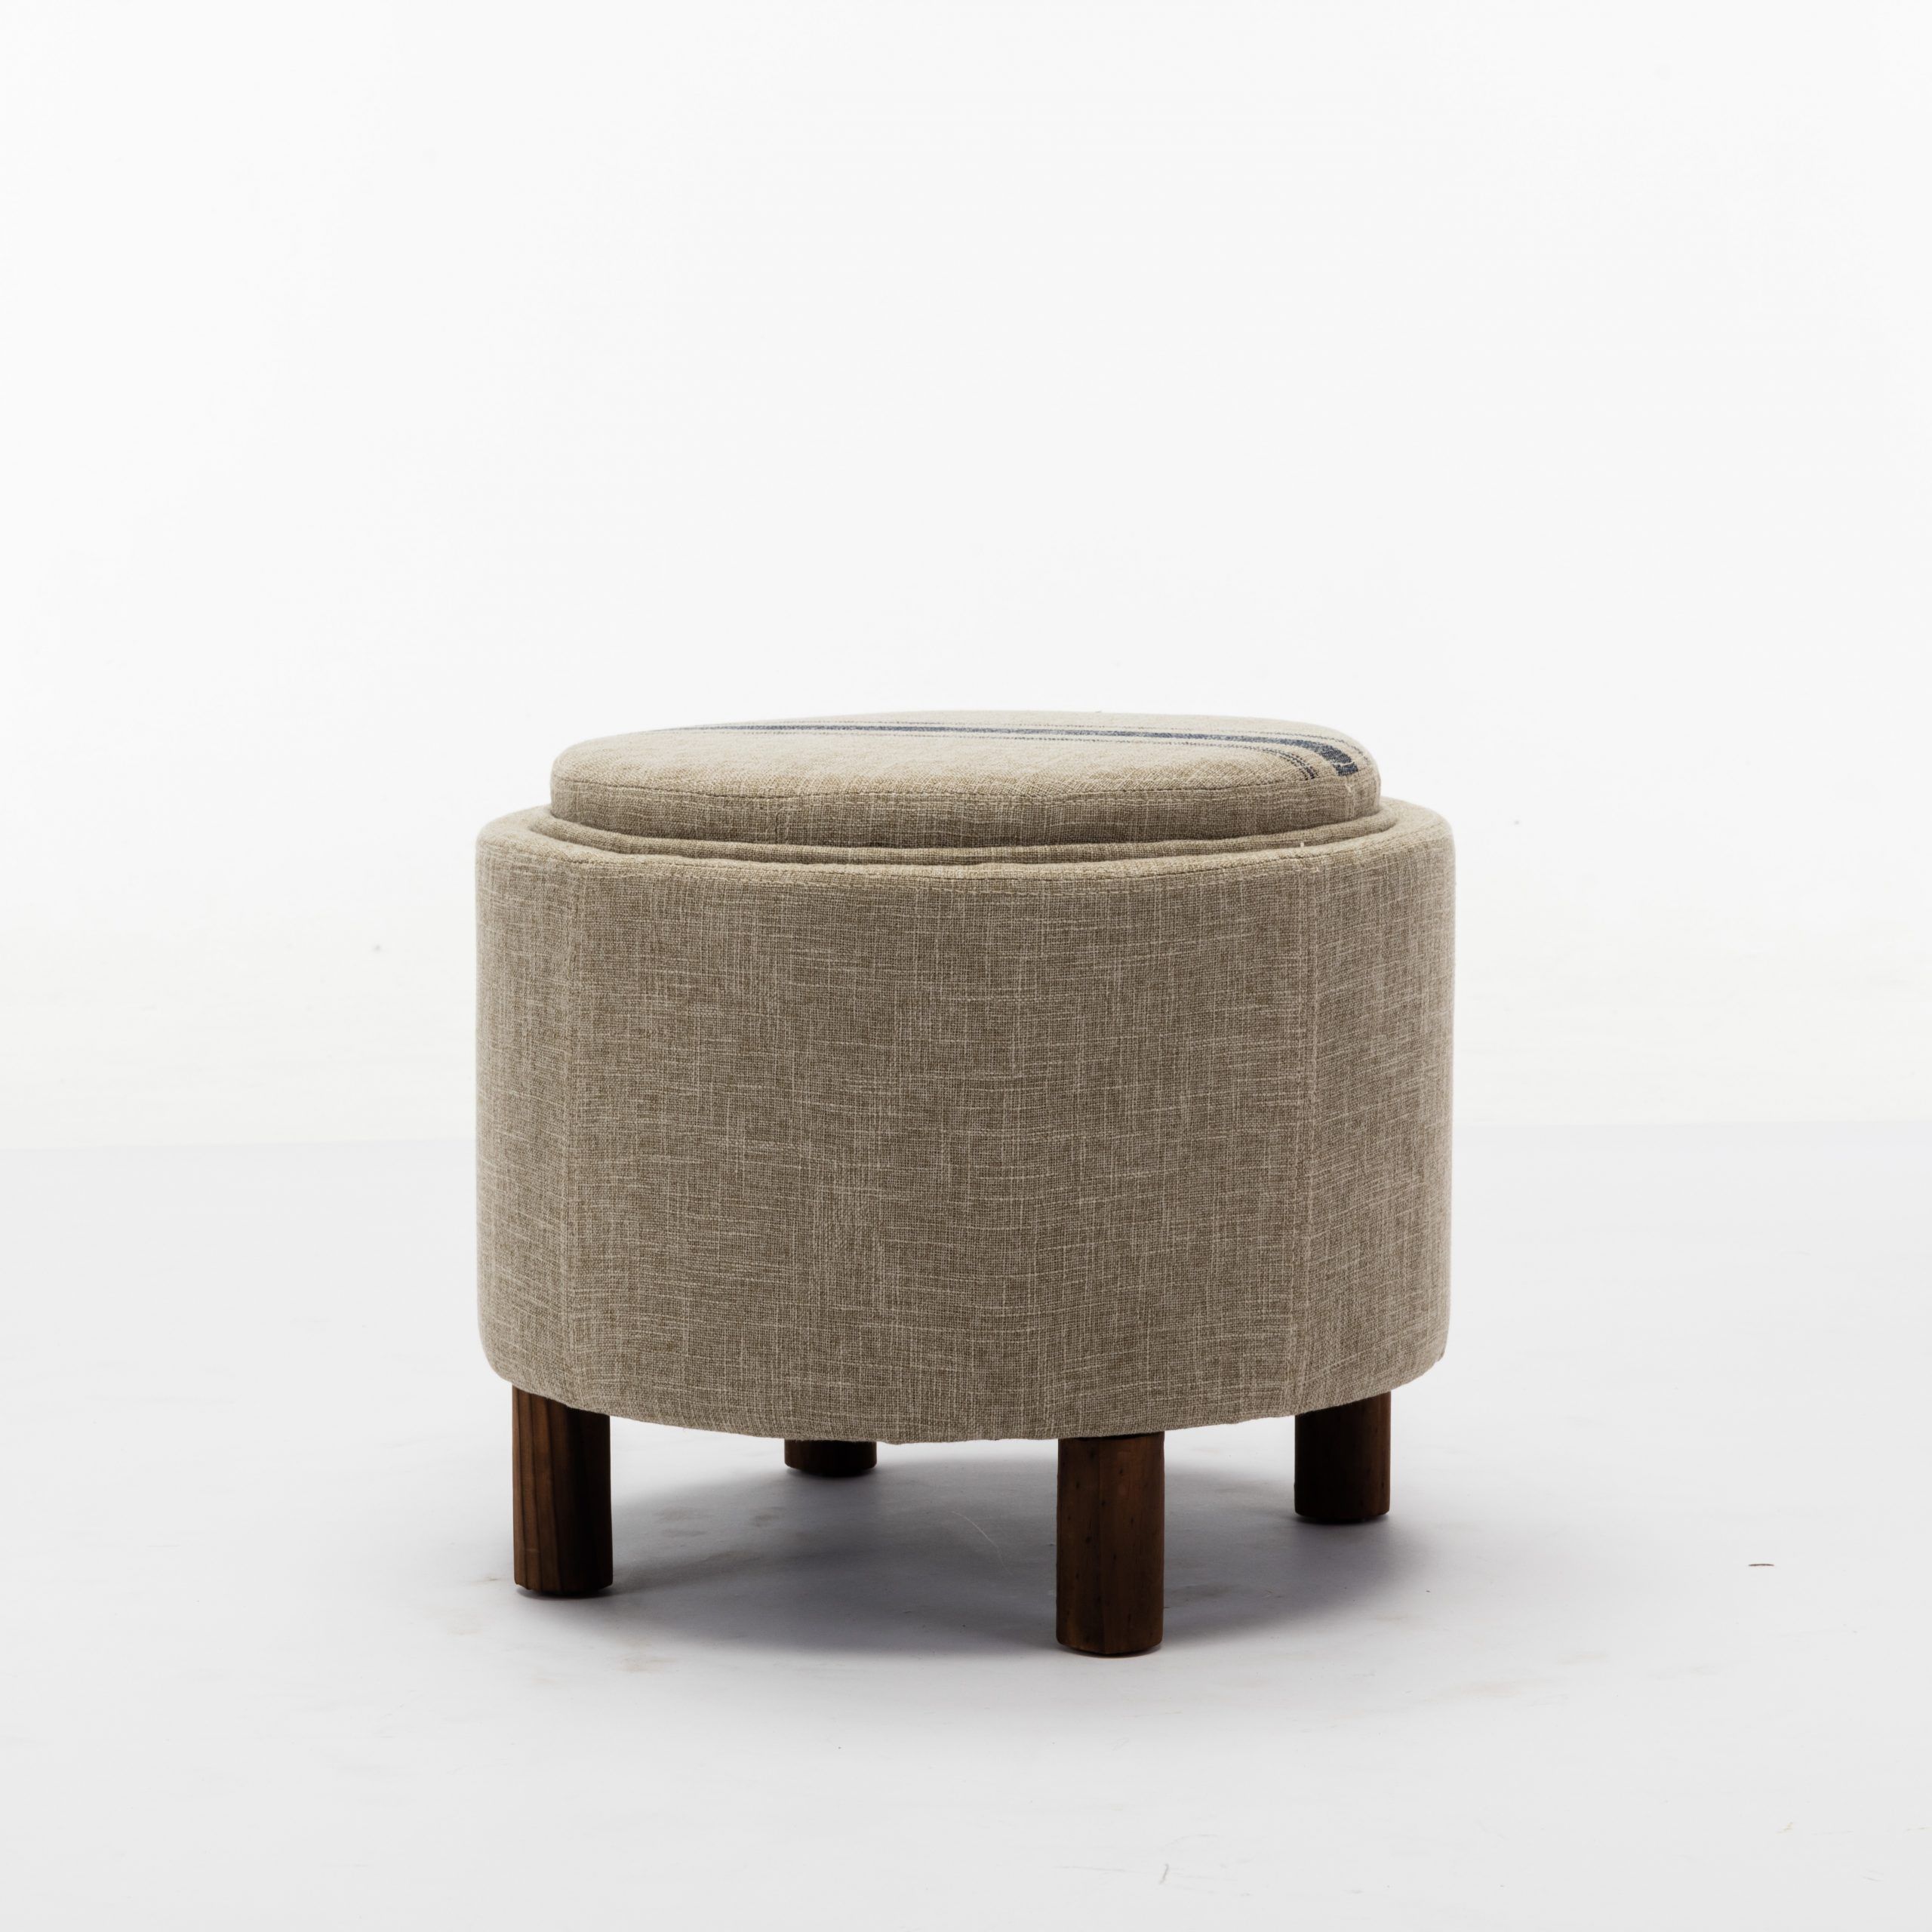 Beige And White Tall Cylinder Pouf Ottomans Regarding Latest Storage Ottoman (View 8 of 10)